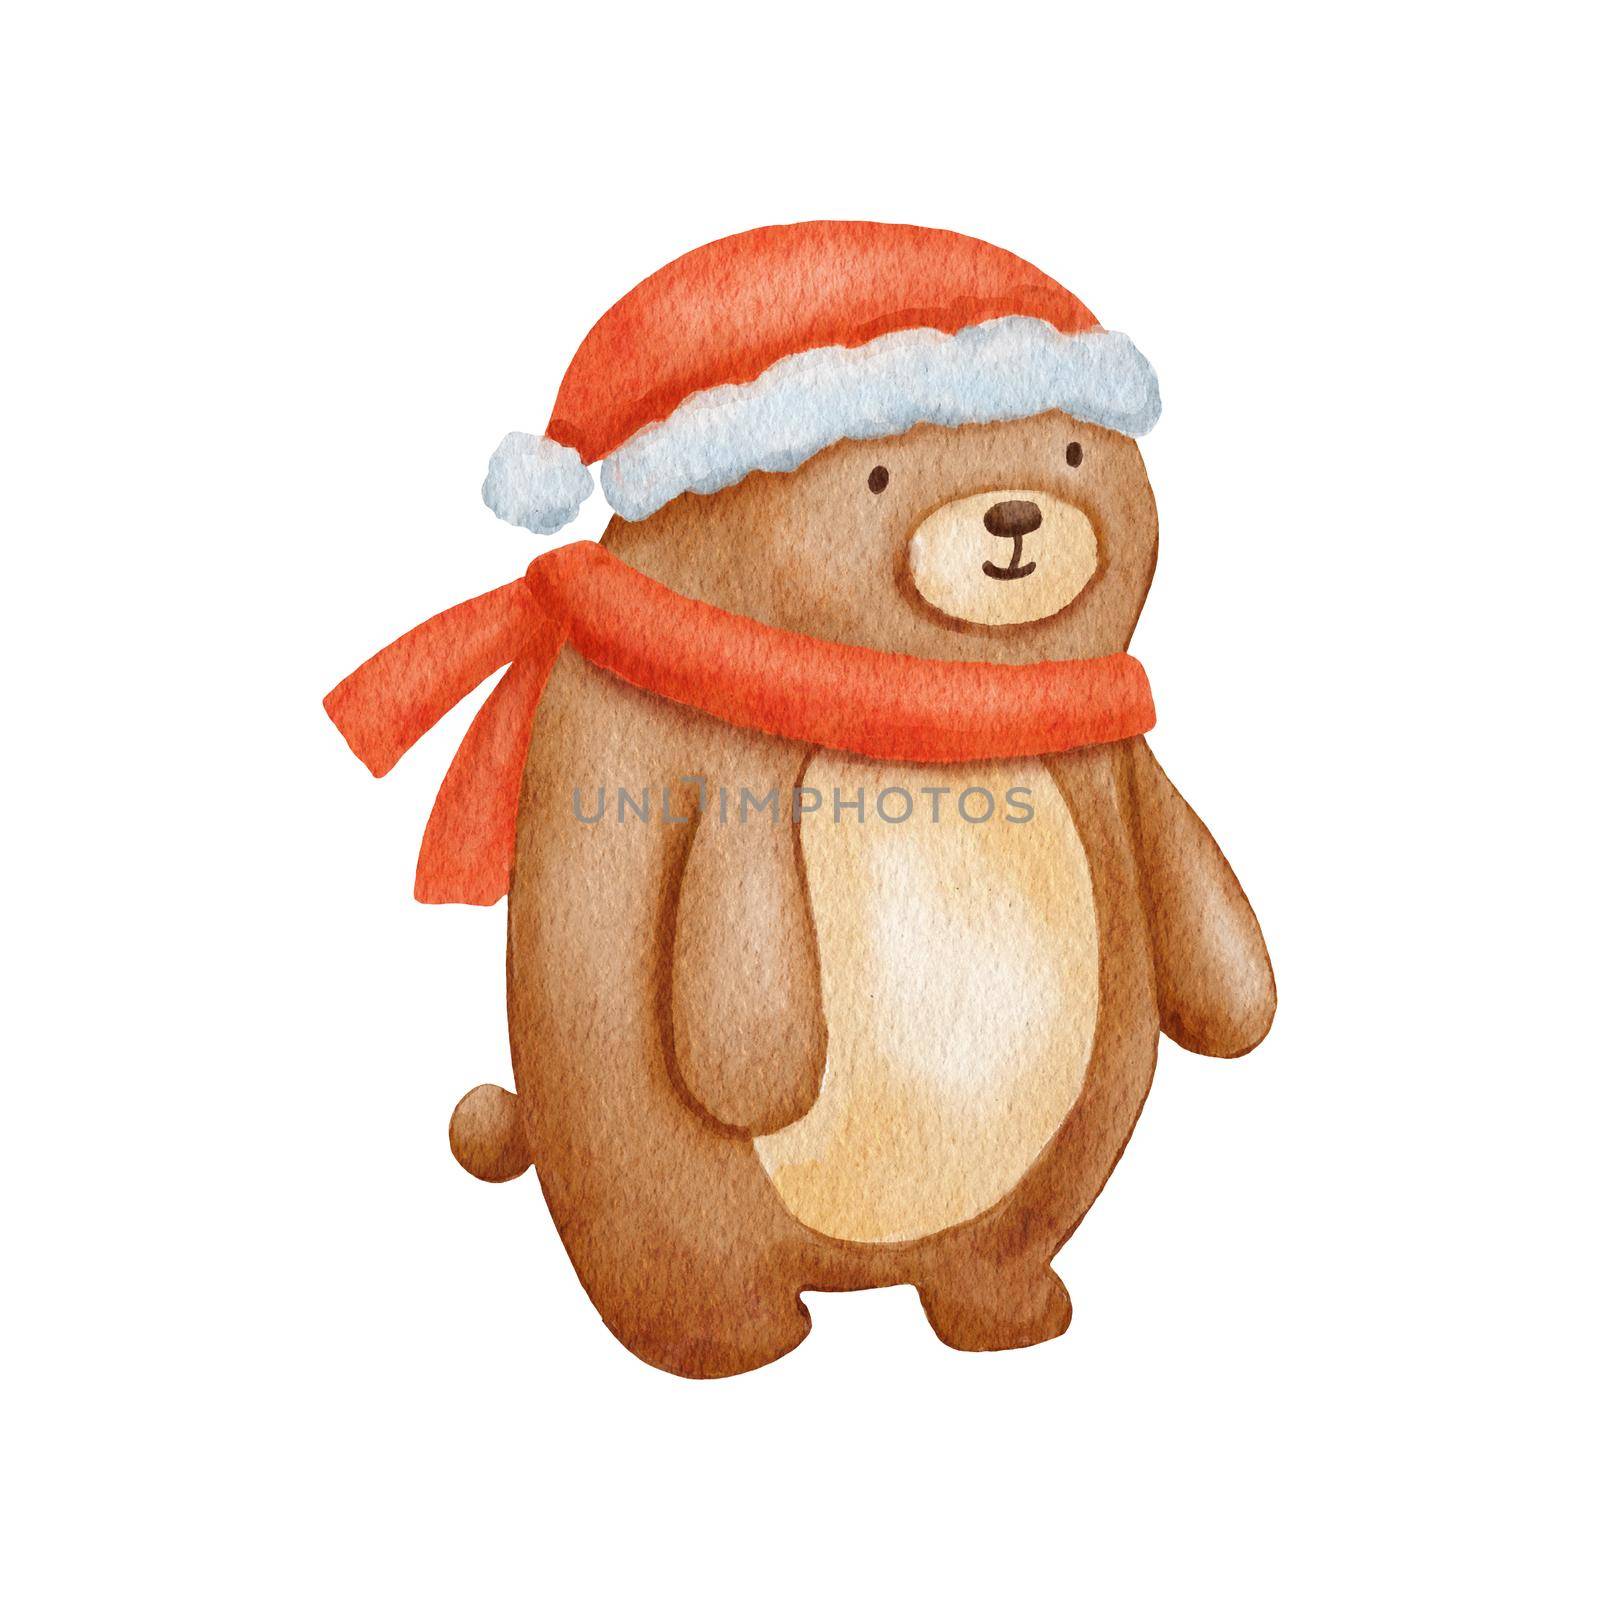 Watercolor Baby Bear character with winter scarf and hat. Hand drawn cute woodland animal. Cartoon illustration isolated on white.